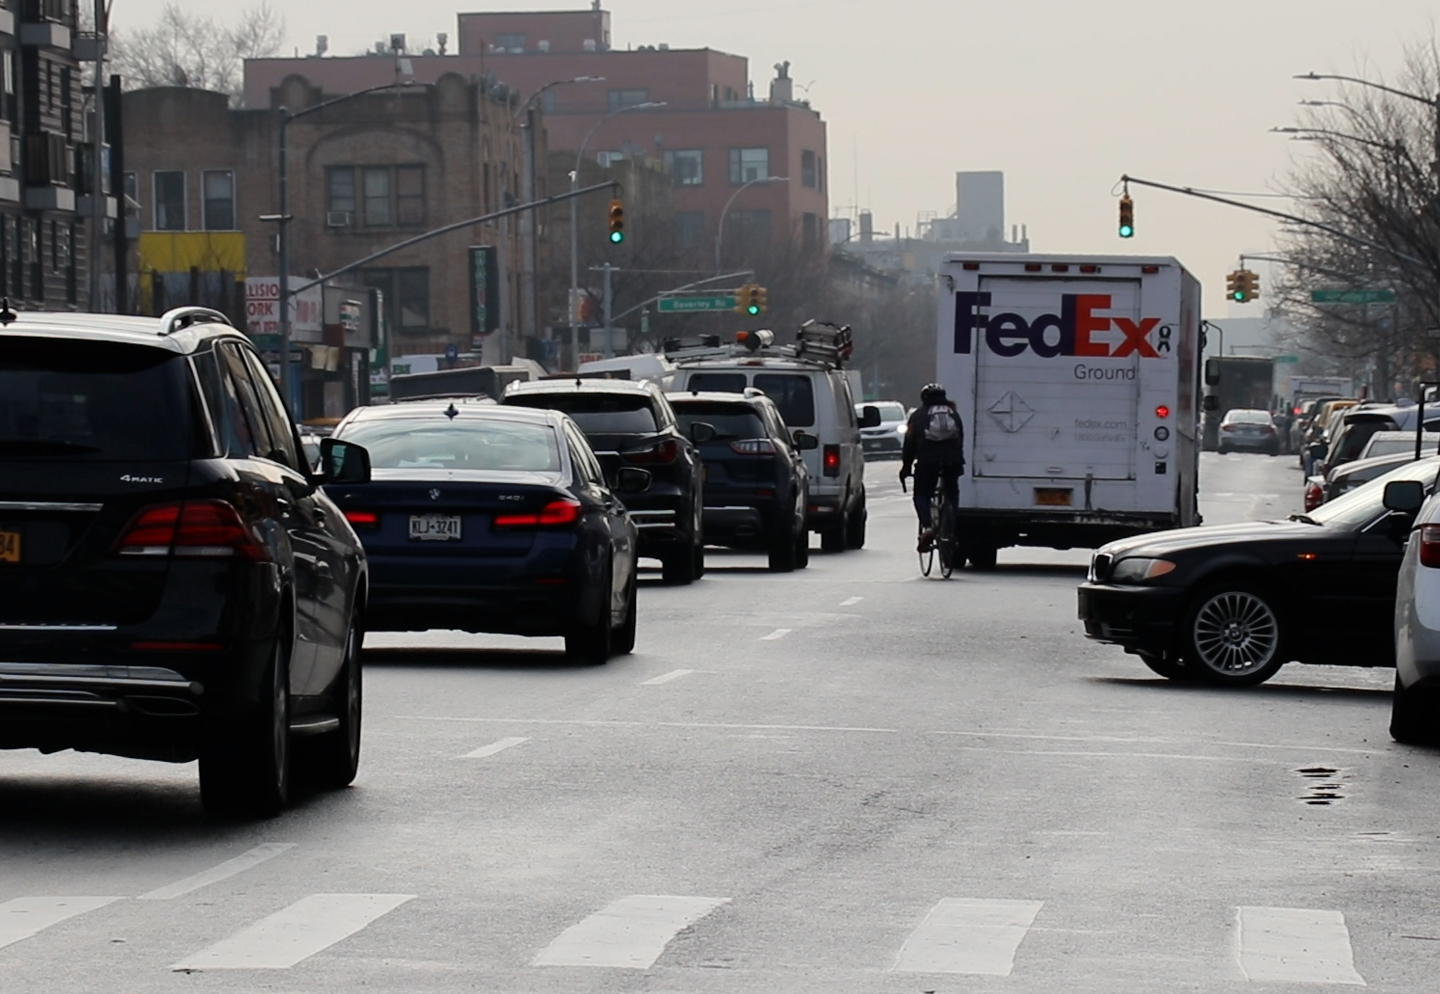 On a wide road, a cyclist merges into car traffic to pass a double-parked FedEx truck that's blocking an entire lane.